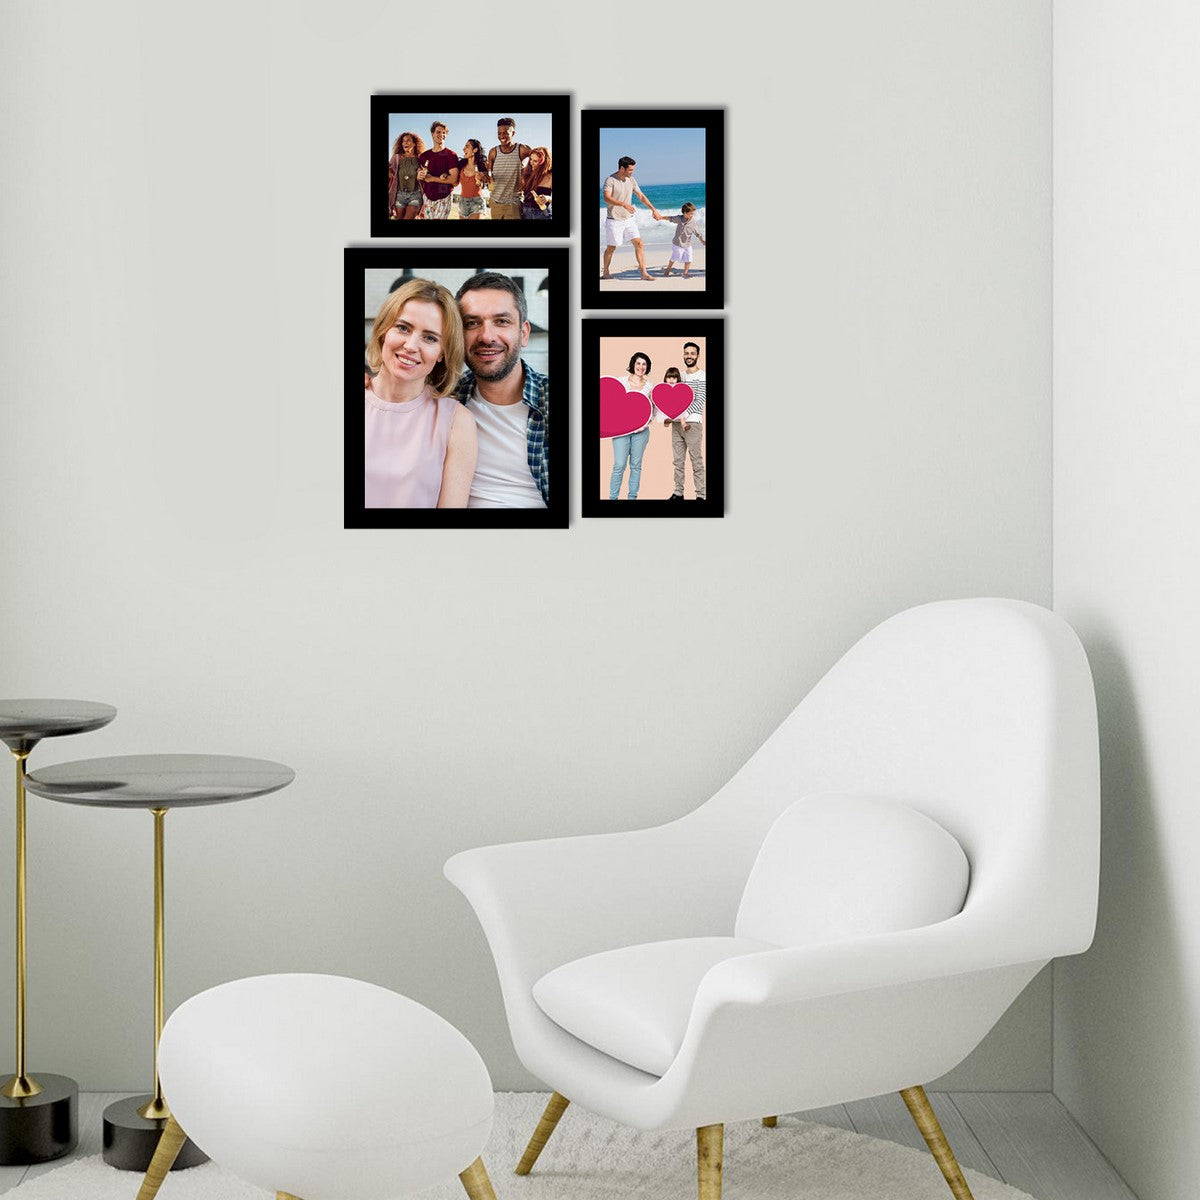 Memory Wall Collage Photo Frame - Set of 4 Photo Frames for 3 Photos of 5"x7" and 1 Photo of 8"x10" 2